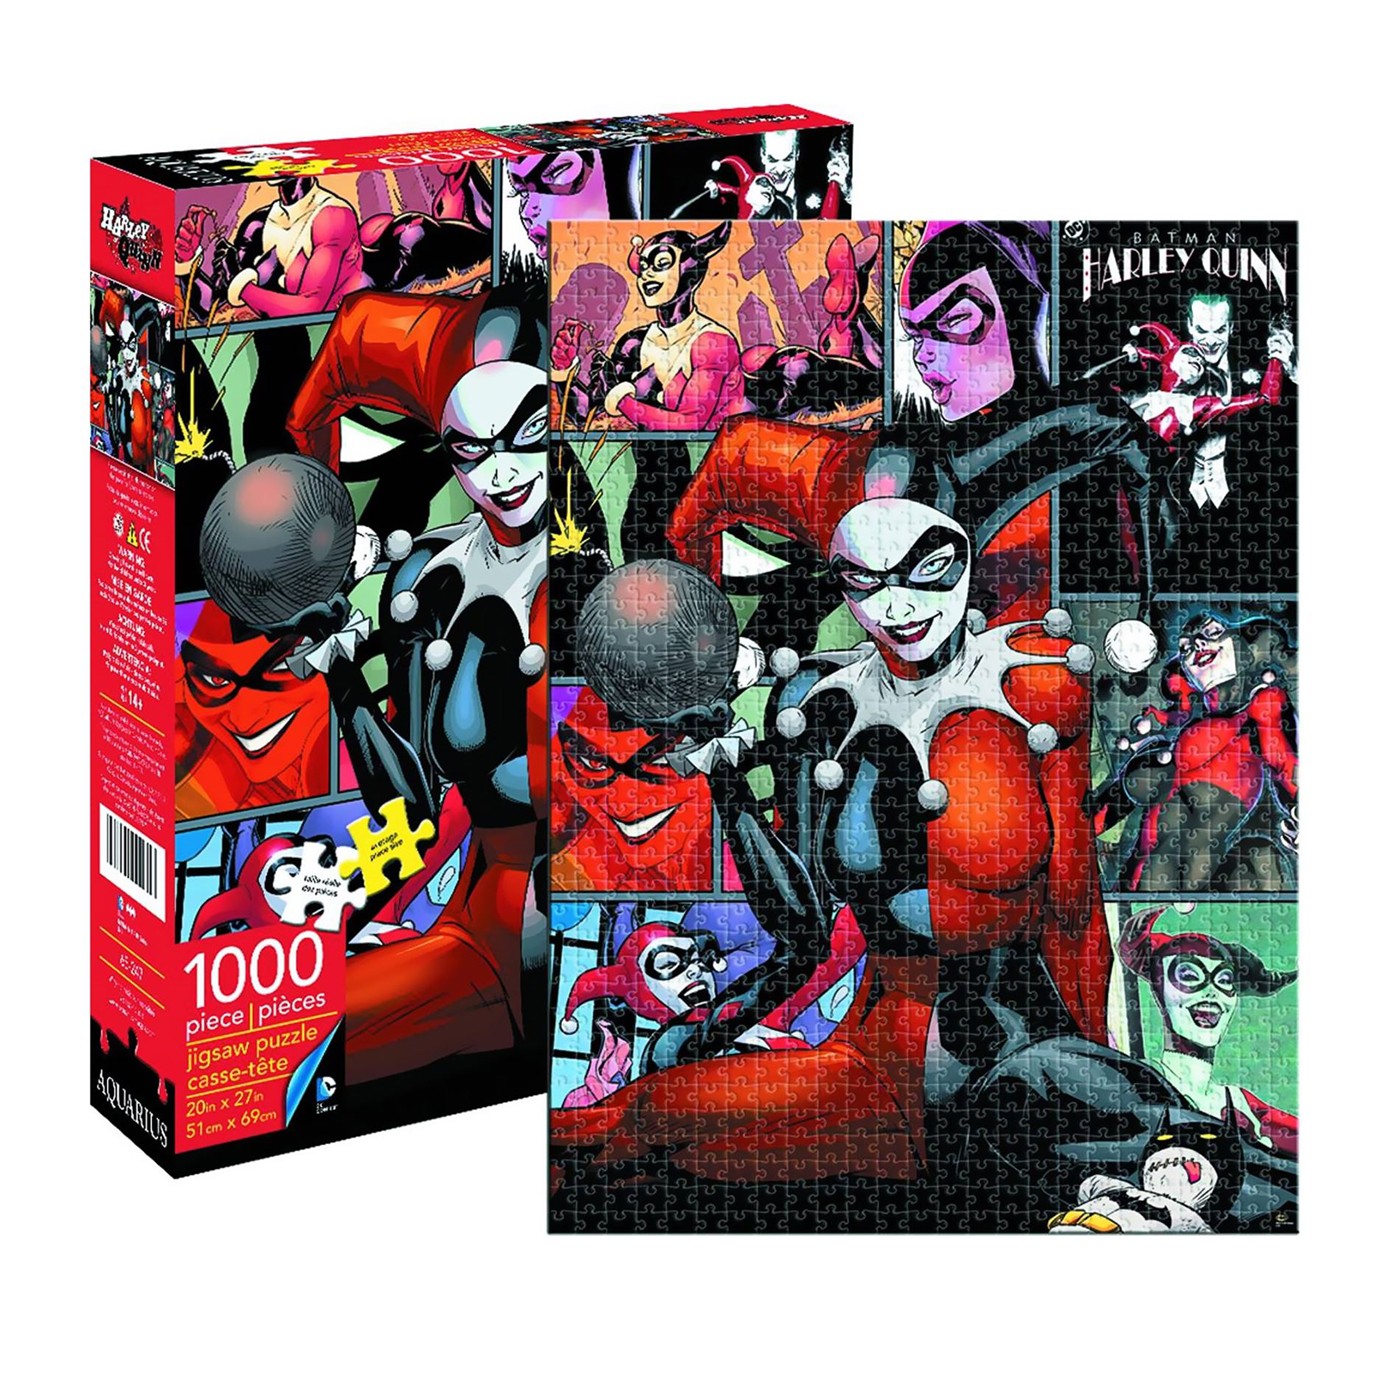 Harley Quinn 1000 Piece Puzzle